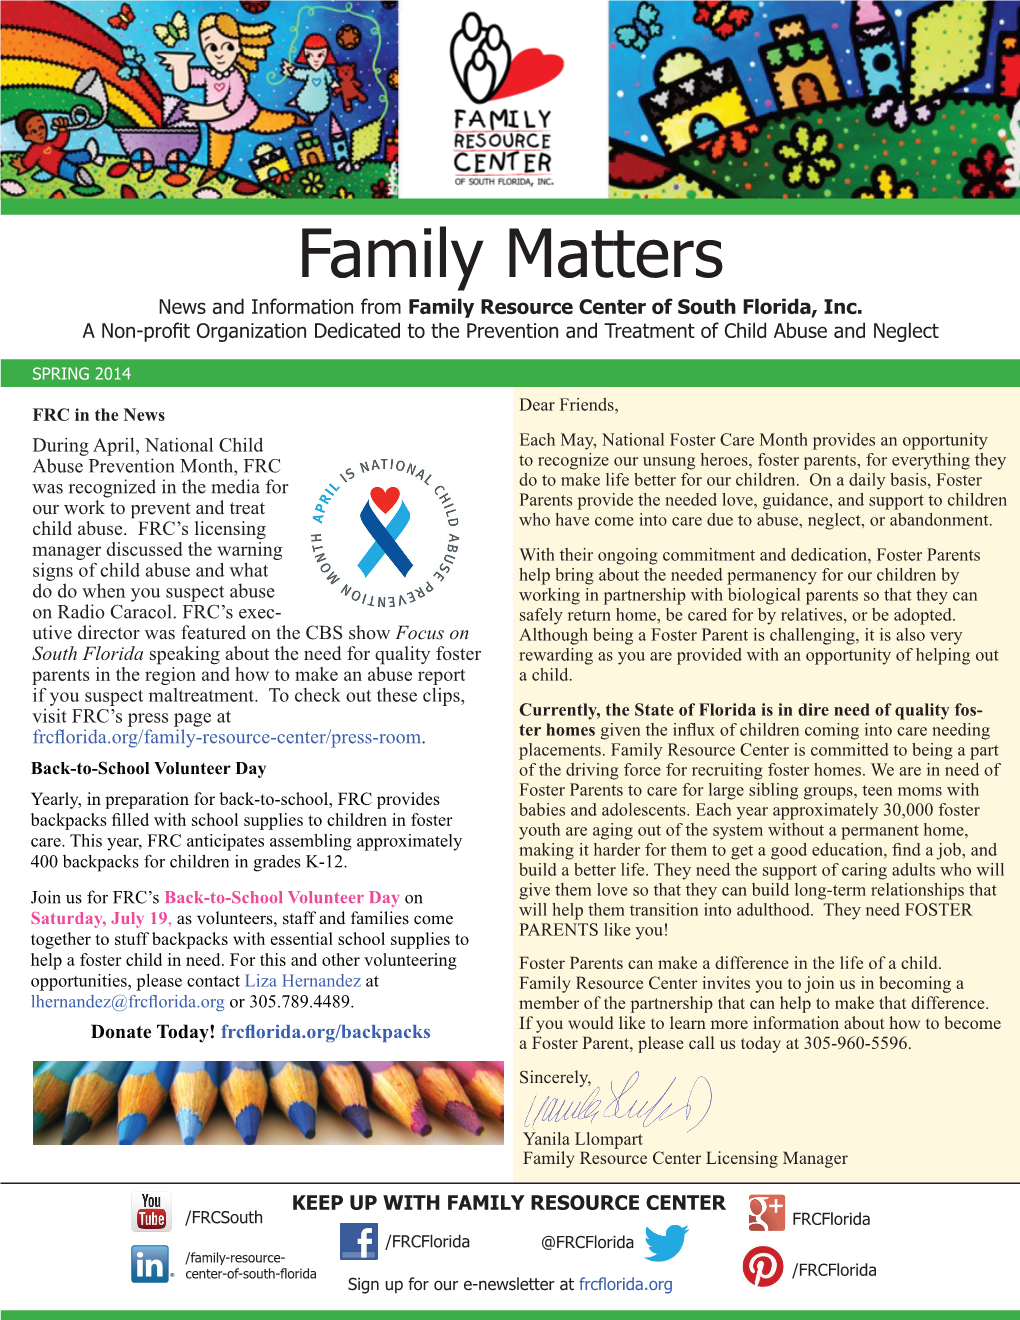 Family Matters, Spring 2014